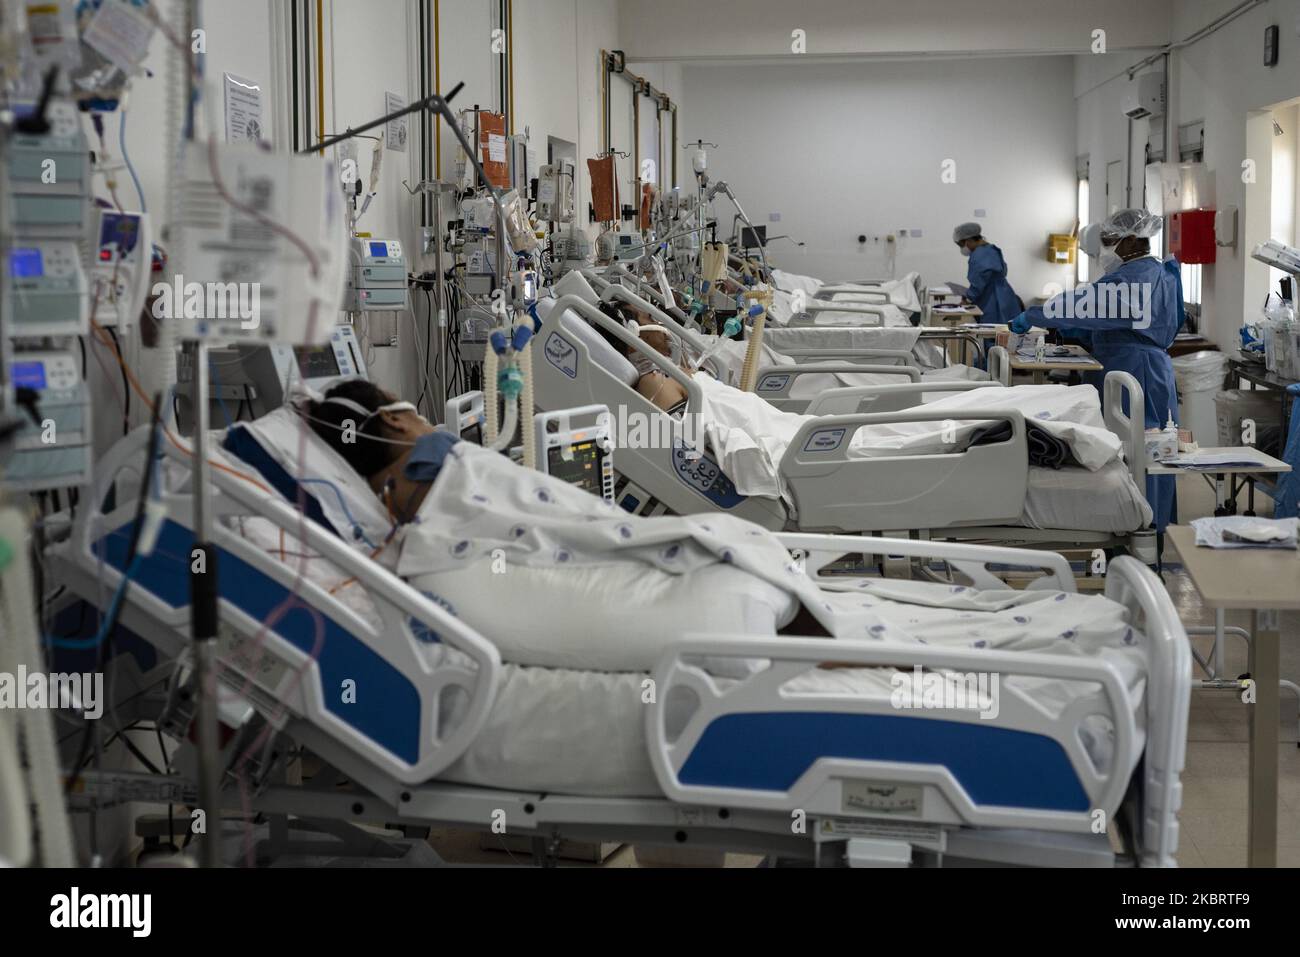 Unconscious and intubated Covid-19 patients are treated in Vila Penteado Hospital's ICU, in the Brasilandia neighborhood of Sao Paulo, on June 21, 2020. According ta a study published in June 21st, Brazil's public hospitals, like Vila Penteado, had almost 40% death rates from the new coronavirus, the double from private hospitals. Brasilandia is one of the neighborhhods in Sao Paulo with highest number of deaths from Covid-19 (Photo by Gustavo Basso/NurPhoto) Stock Photo